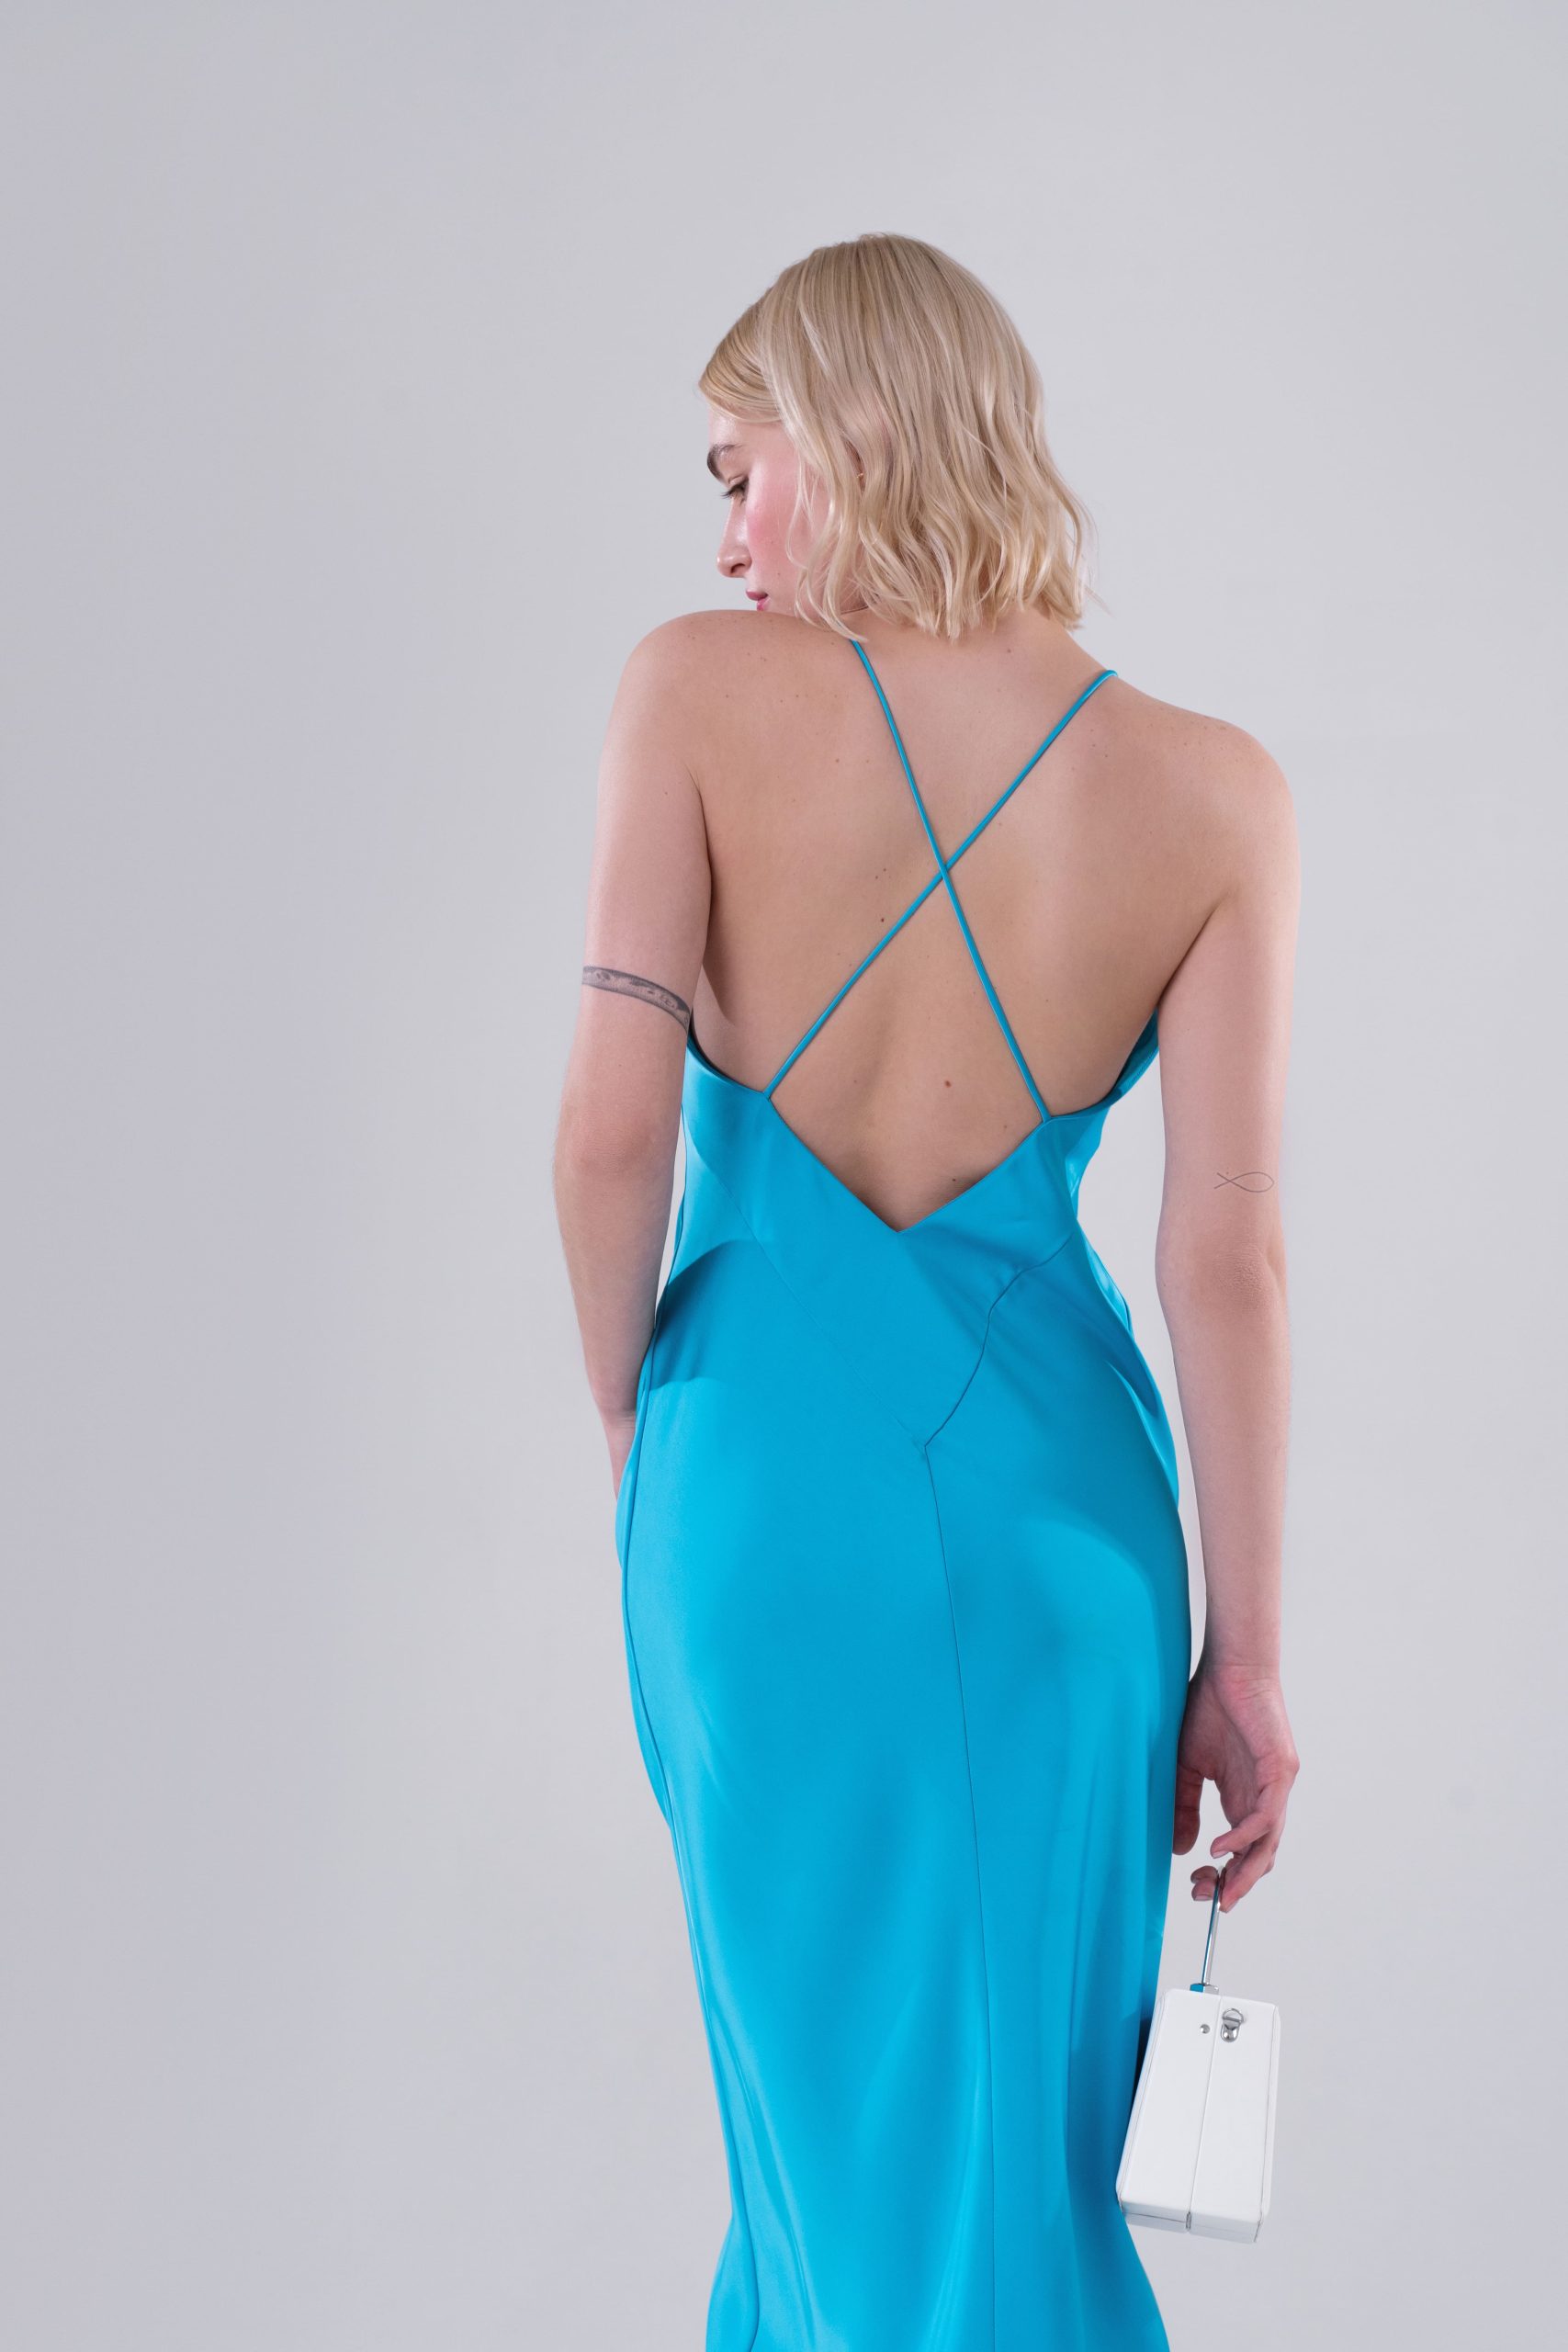 Woman wearing the Lucia Dress sewing pattern from Vikisews on The Fold Line. A slip dress pattern made in silk, artificial silk, dress-weight viscose, crepe back satin or challis fabrics, featuring a close fit, bias cut, centre back seam, bust darts, spaghetti straps criss-crossing at the back, open back V cut and midi length.